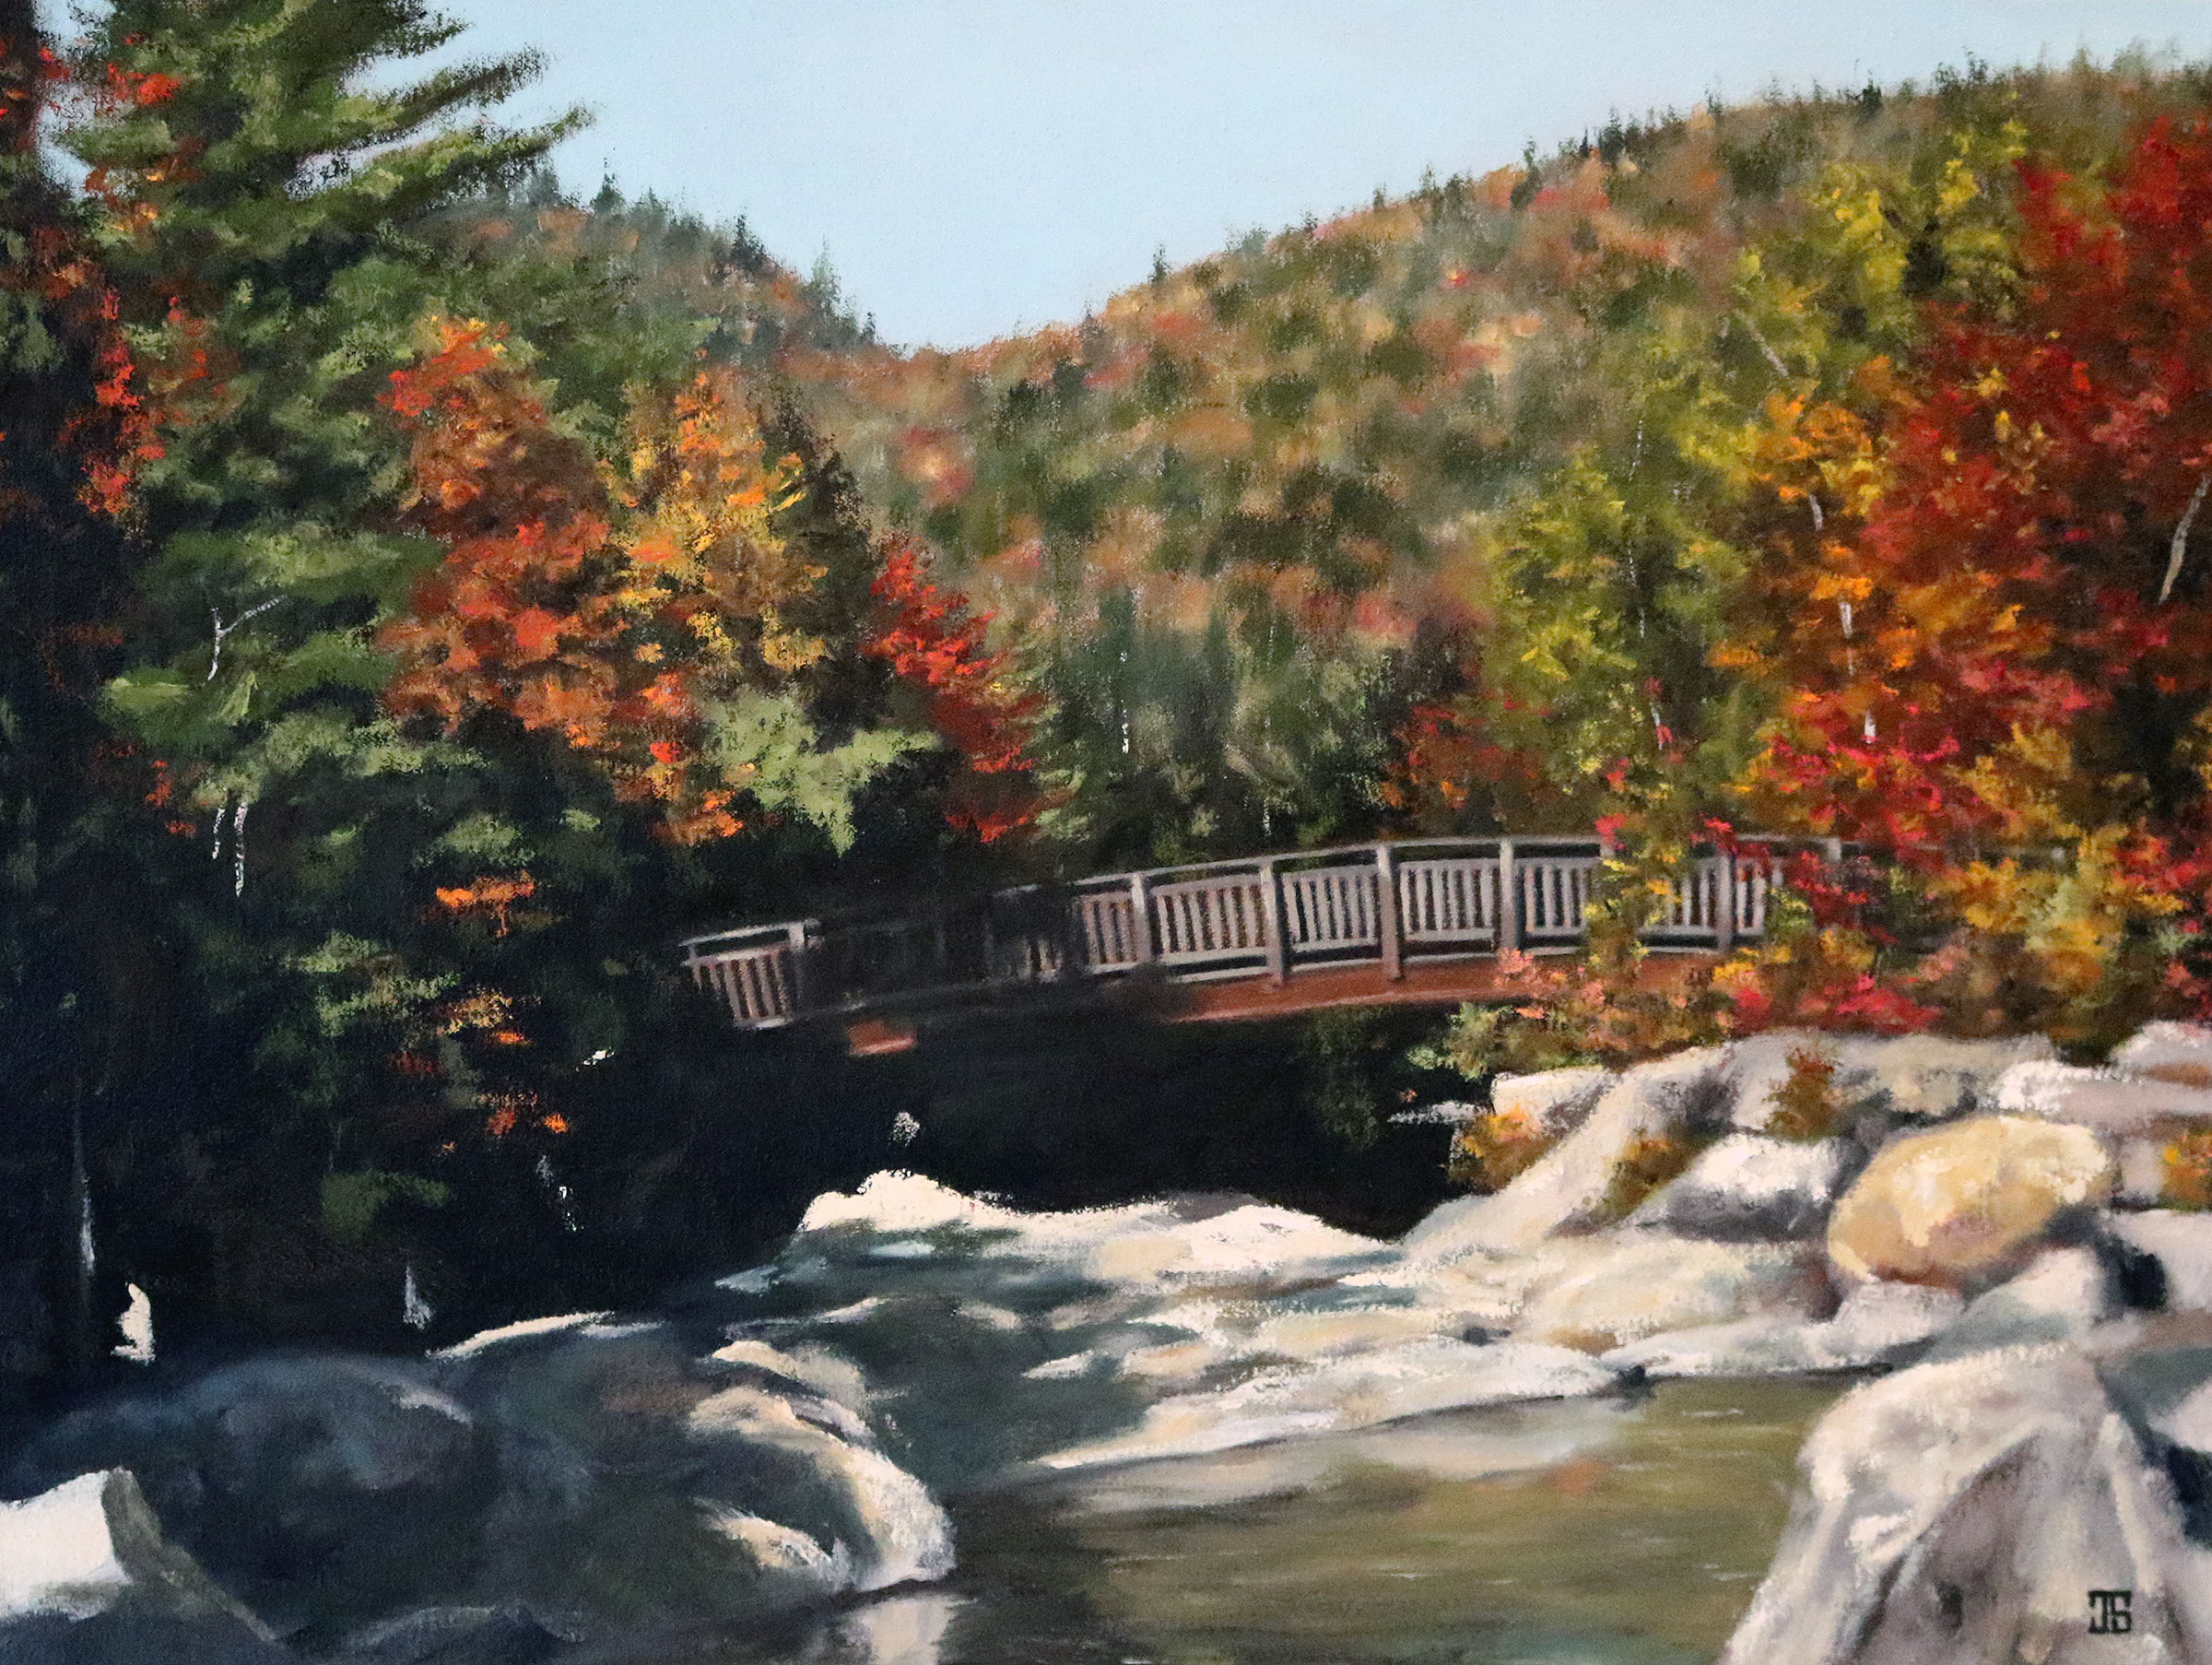 Oil painting "Rocky Gorge, White Mountain National Forest, New Hampshire" by Jeffrey Dale Starr